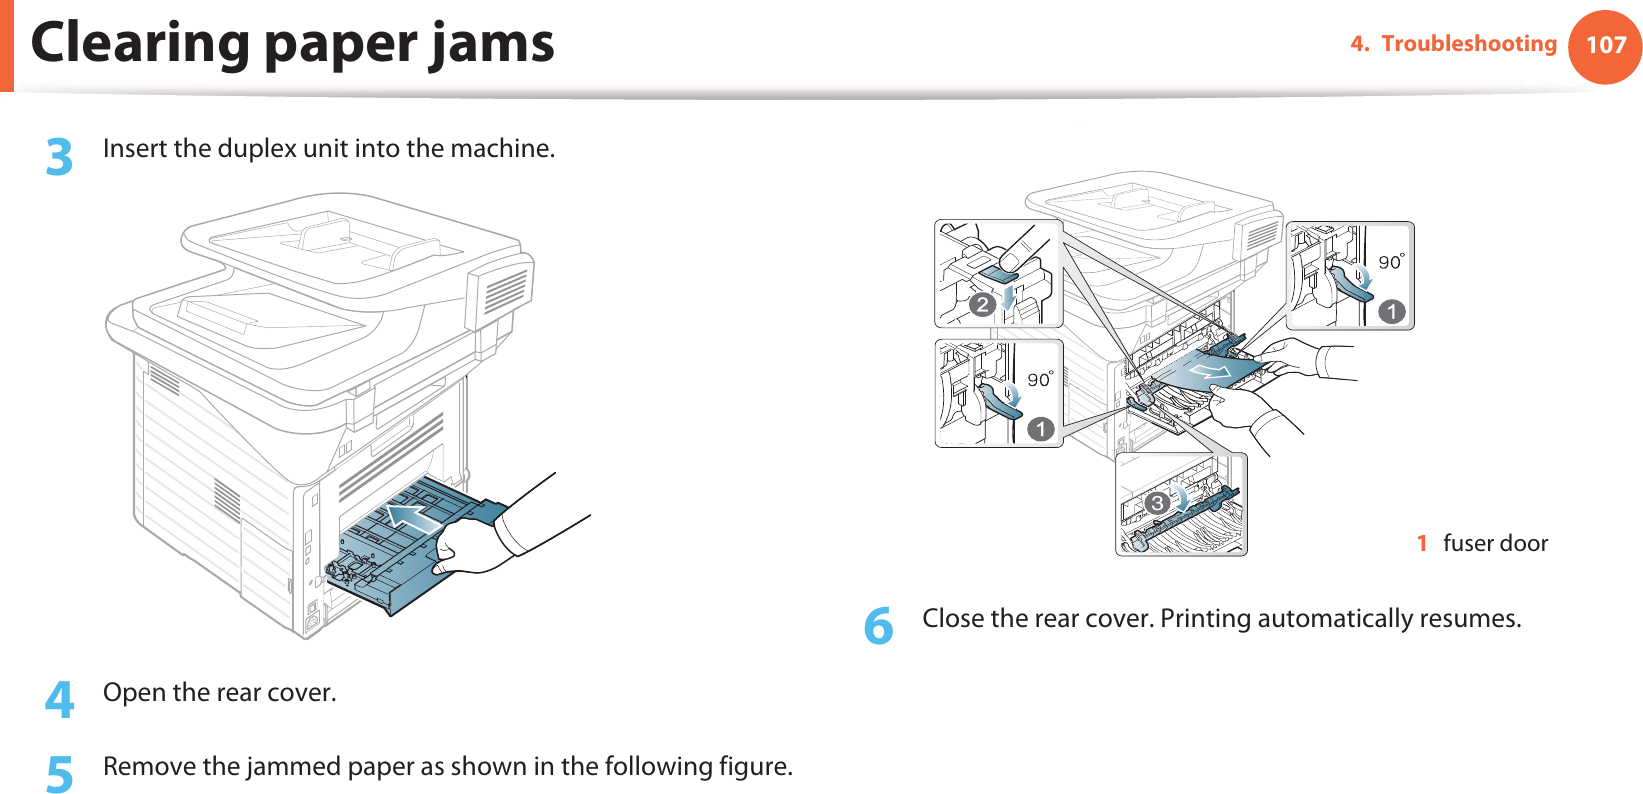 Clearing paper jams 1074. Troubleshooting3  Insert the duplex unit into the machine.4  Open the rear cover.5  Remove the jammed paper as shown in the following figure.6  Close the rear cover. Printing automatically resumes.1fuser door33